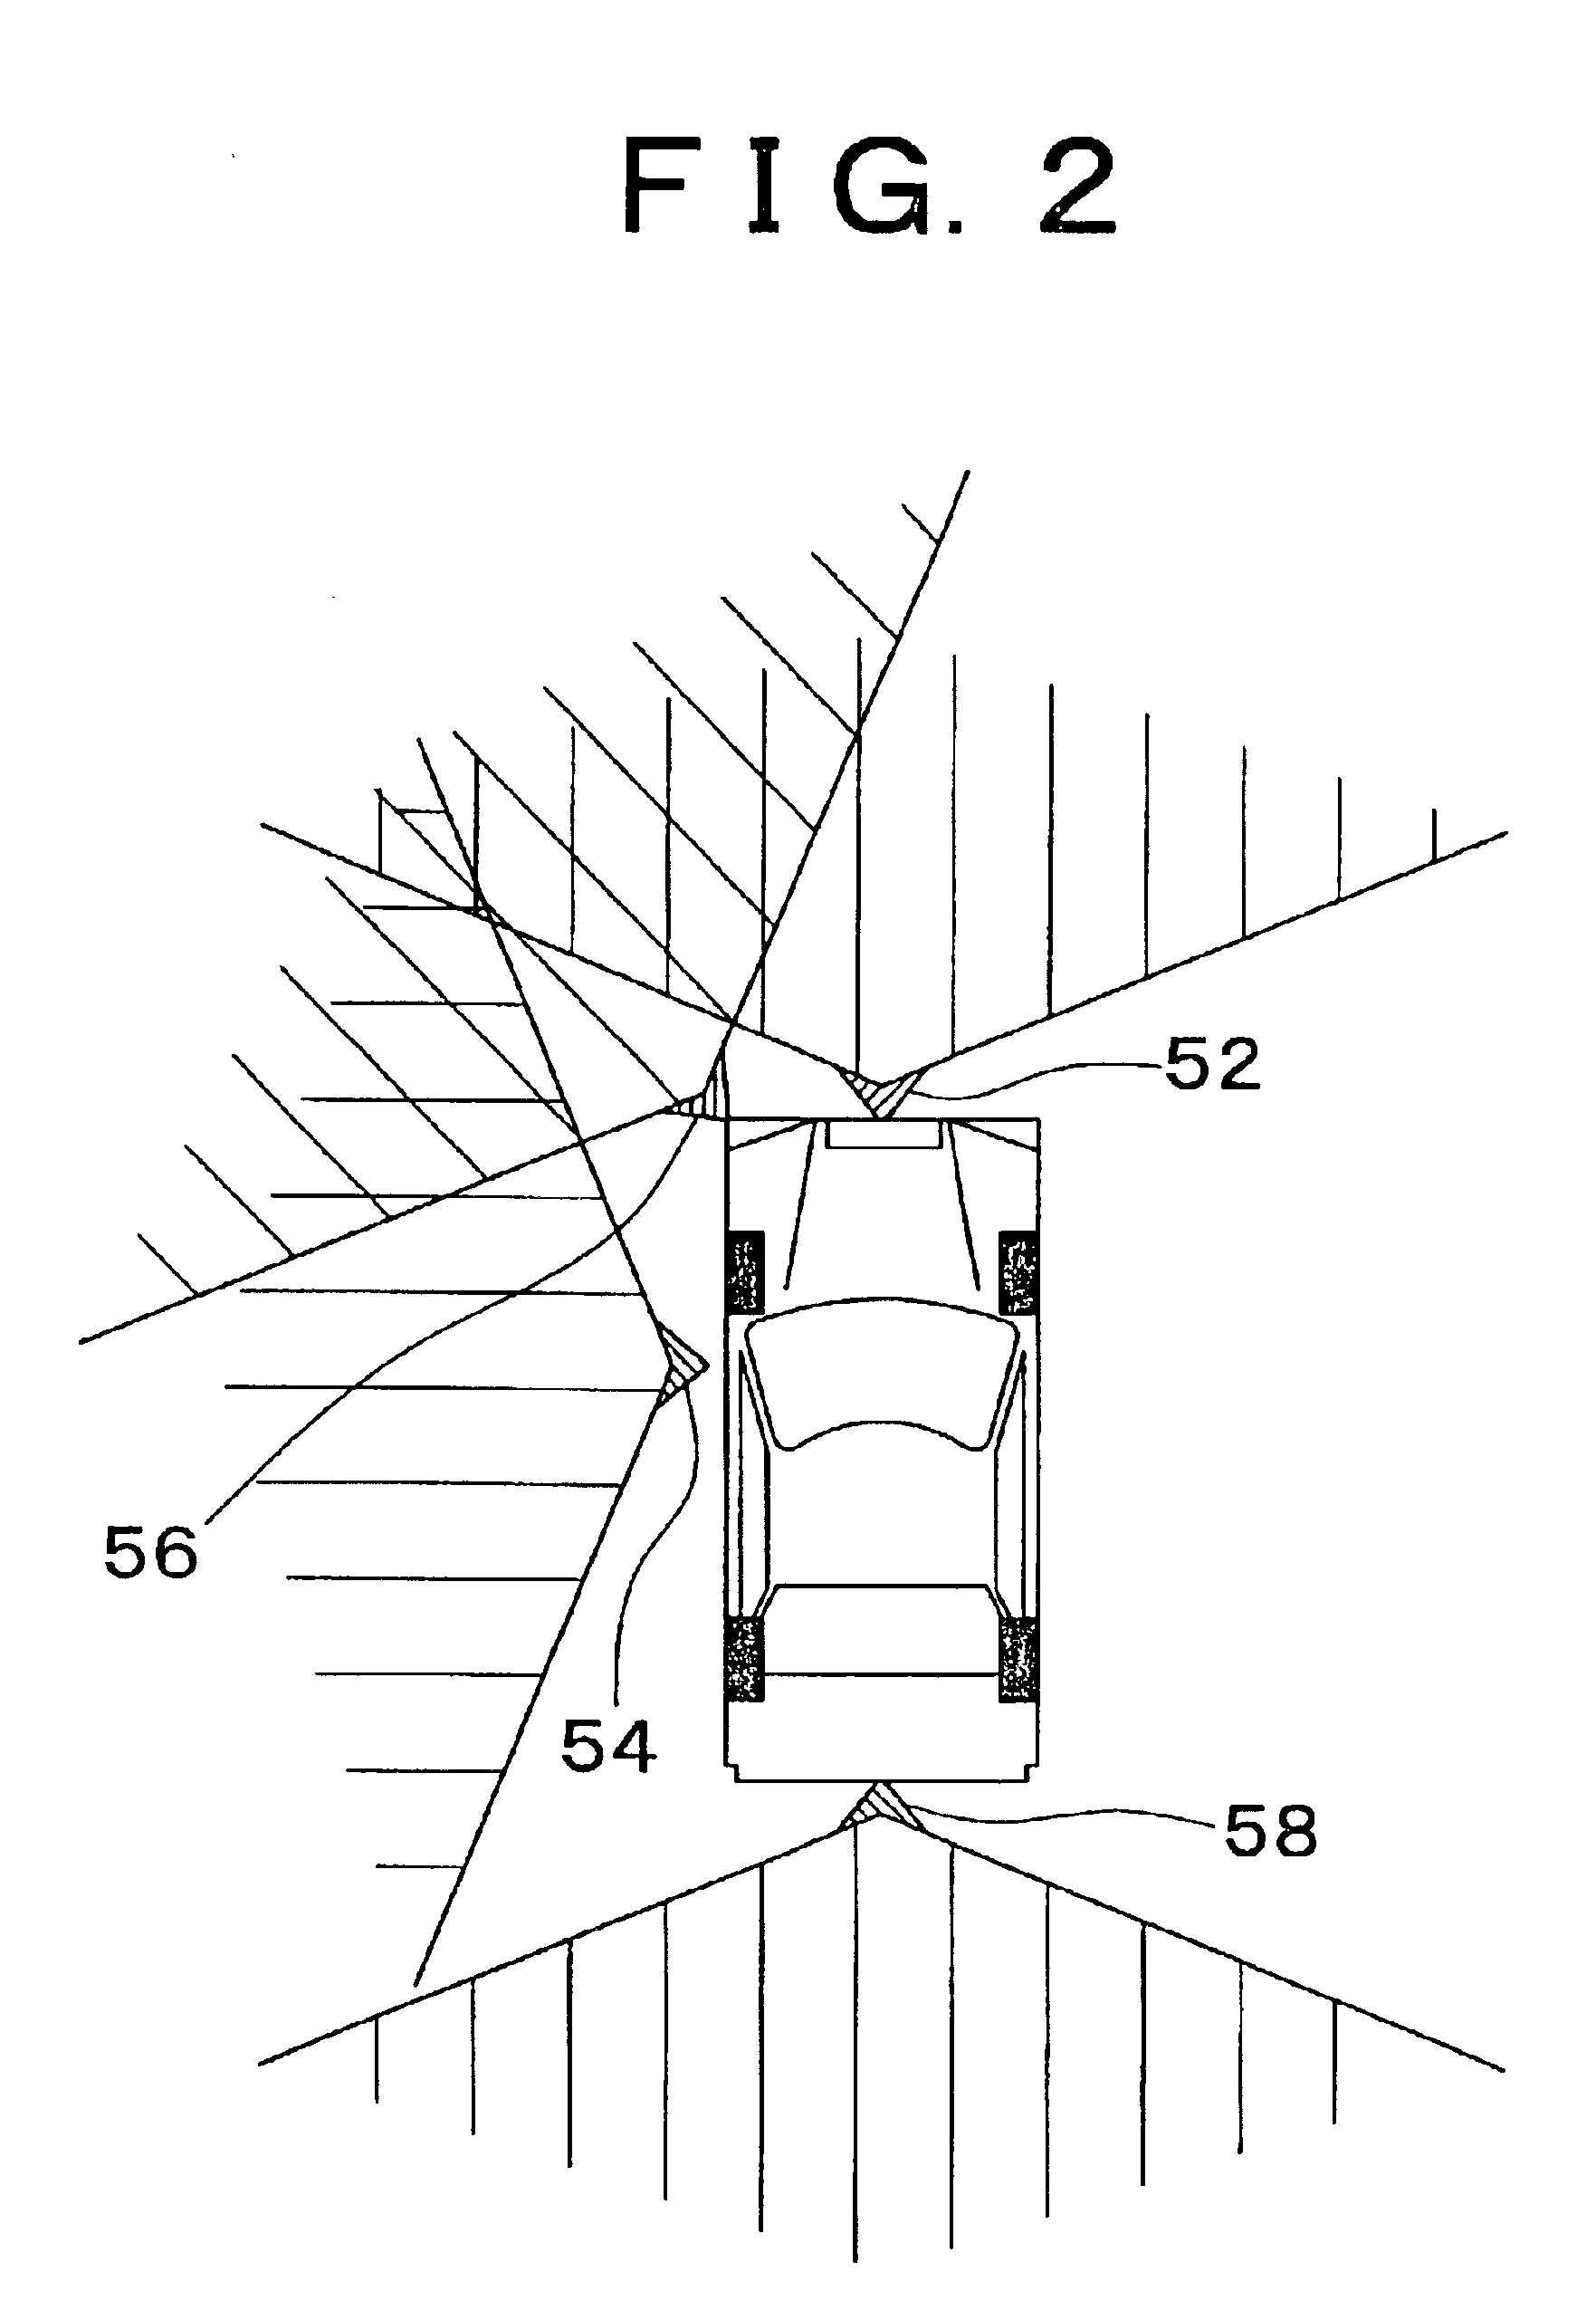 Device for monitoring area around vehicle